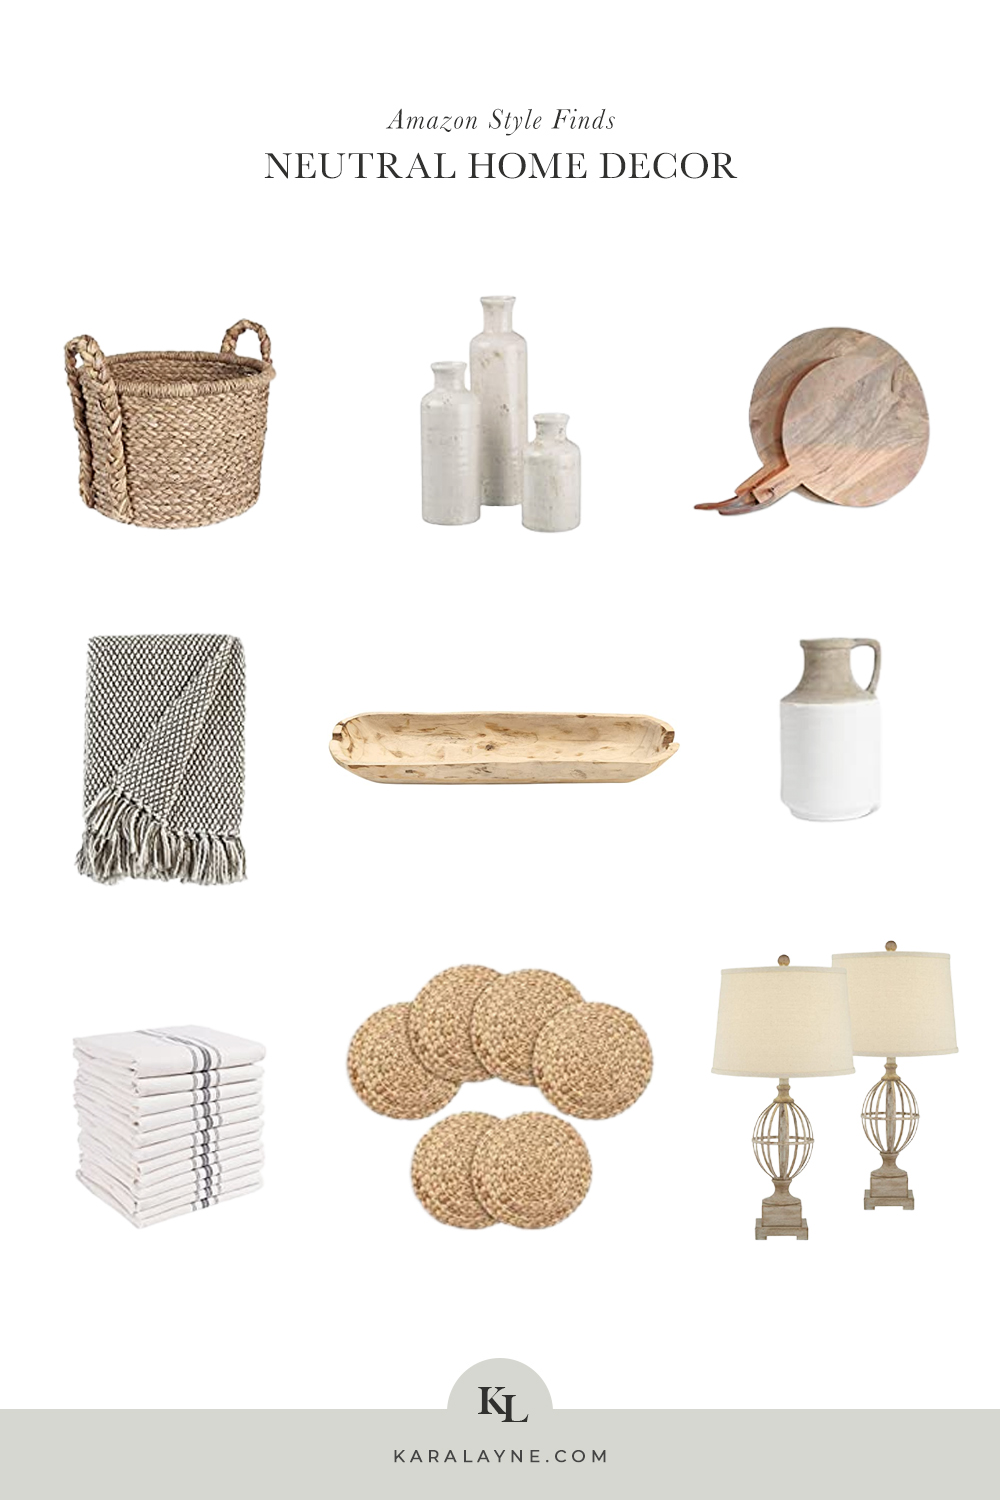 Sharing my favorite neutral home decor finds on Amazon. Catch them now on KaraLayne.com!